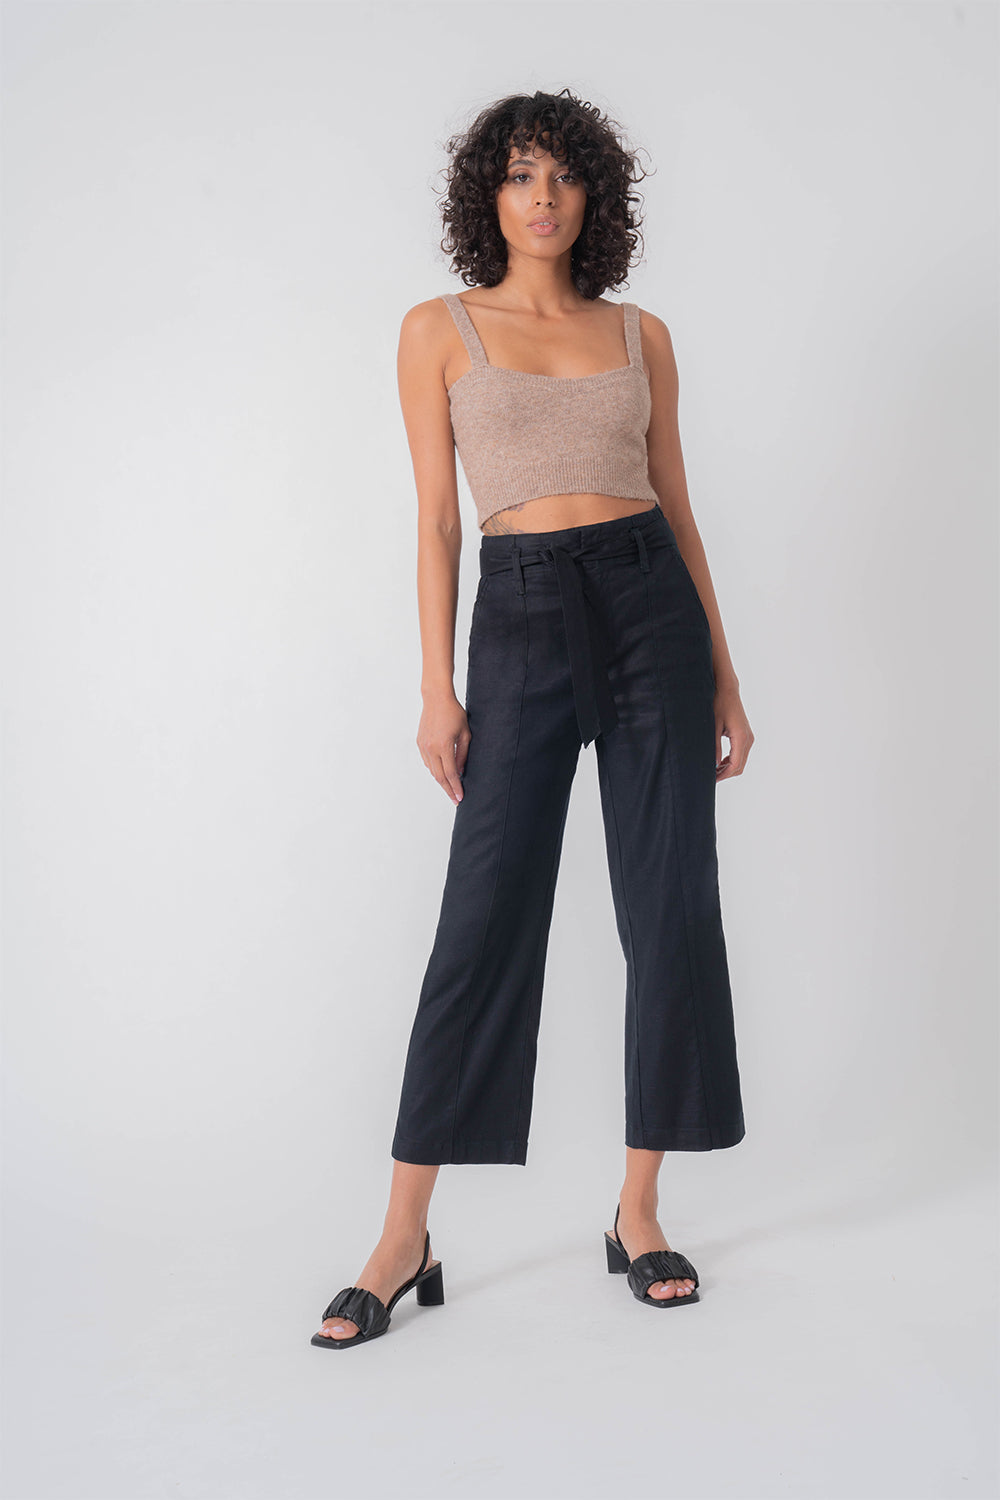 Bette Seamed Pant